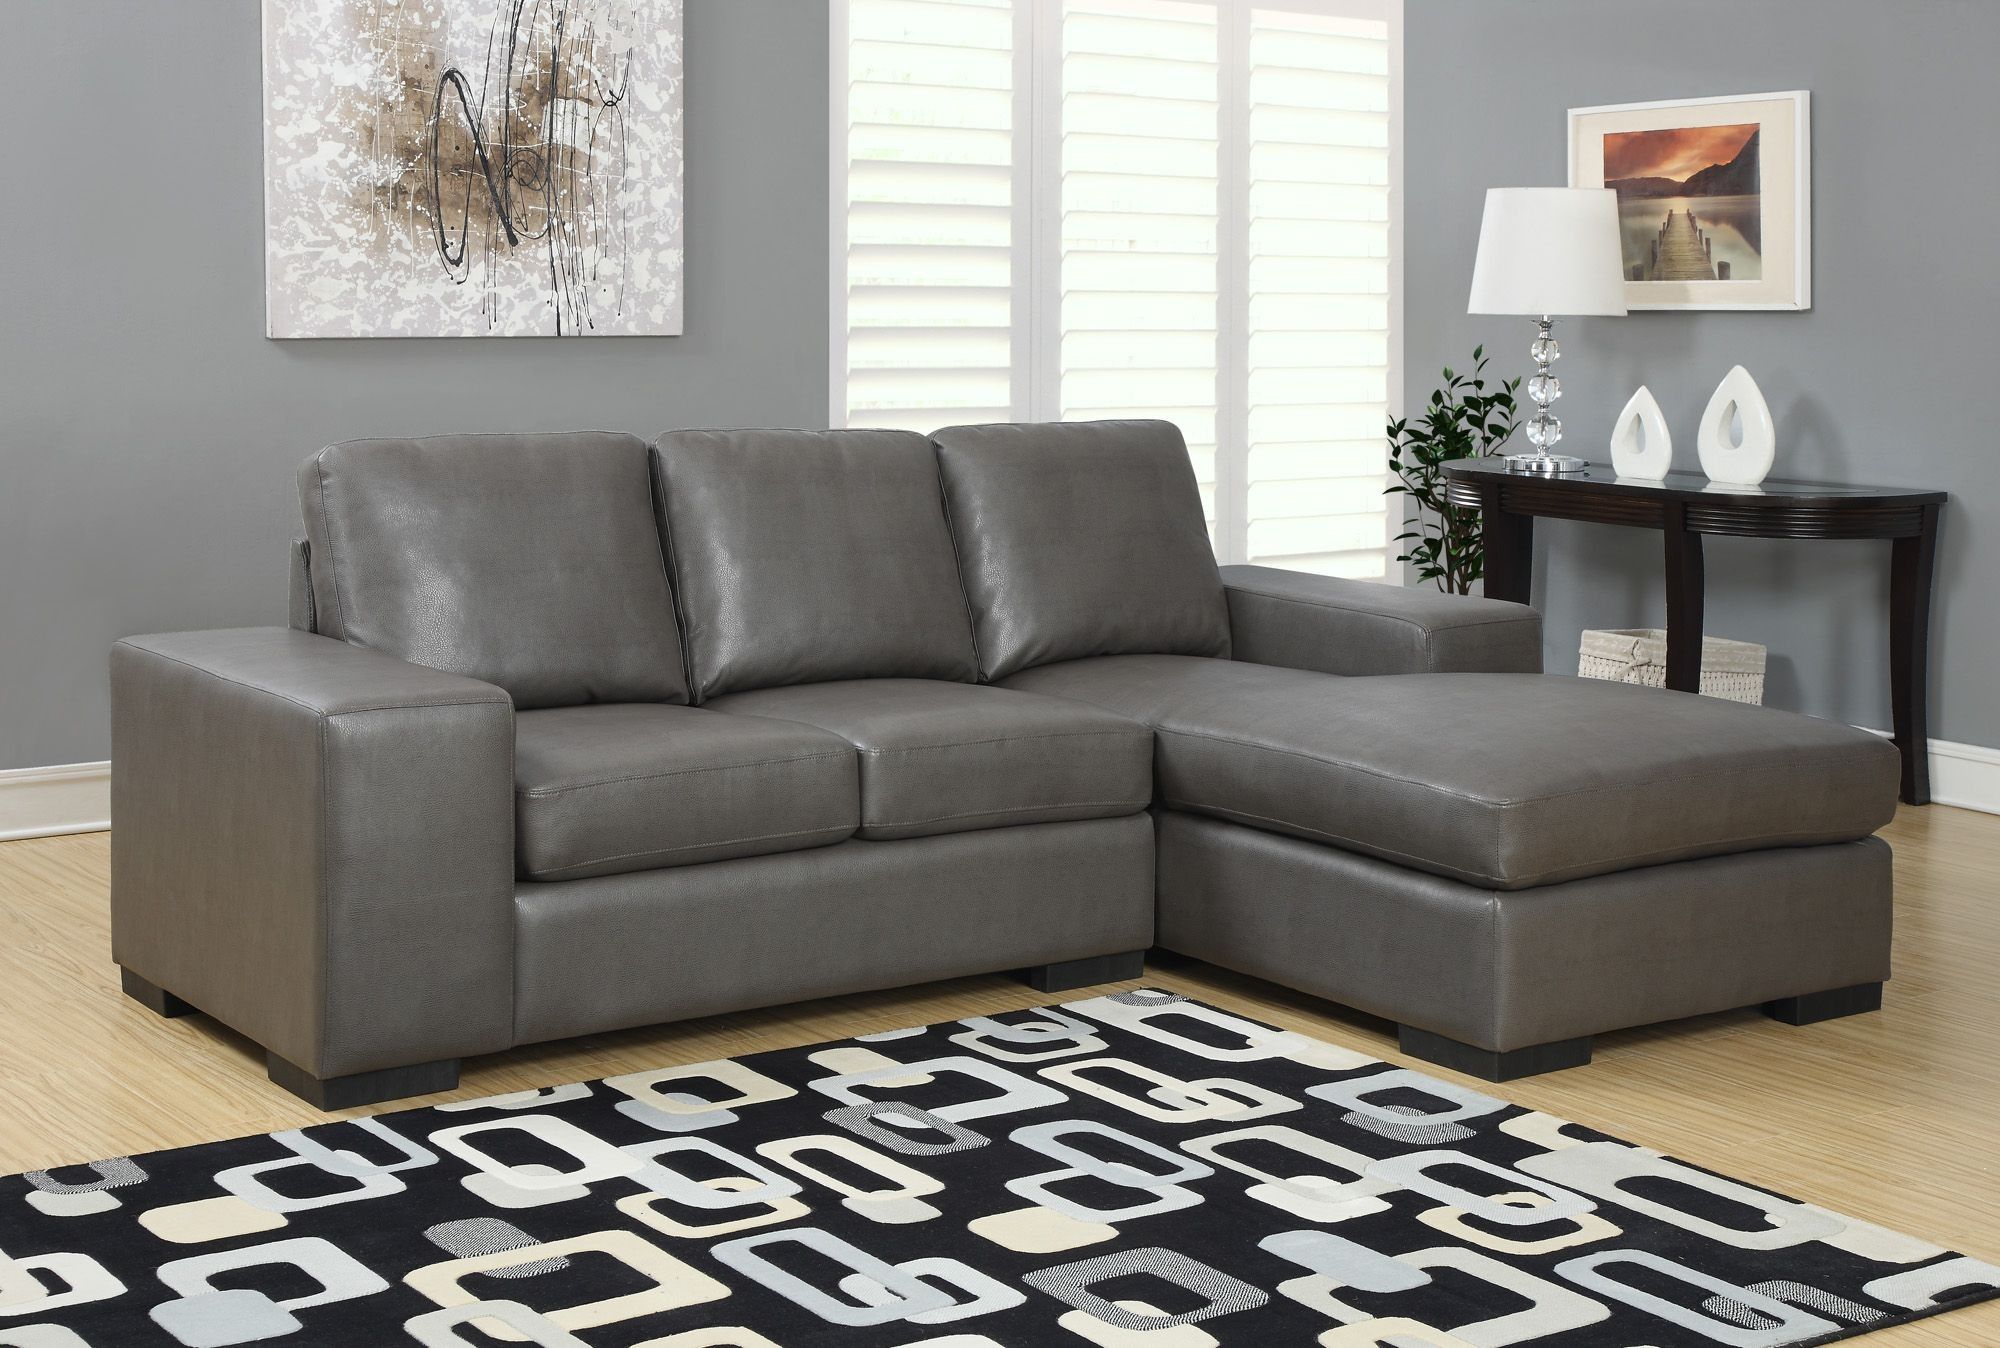 Charcoal Gray Bonded Leather/match Sofa Sectional From With Regard To Sectional Sofas In Gray (View 14 of 15)